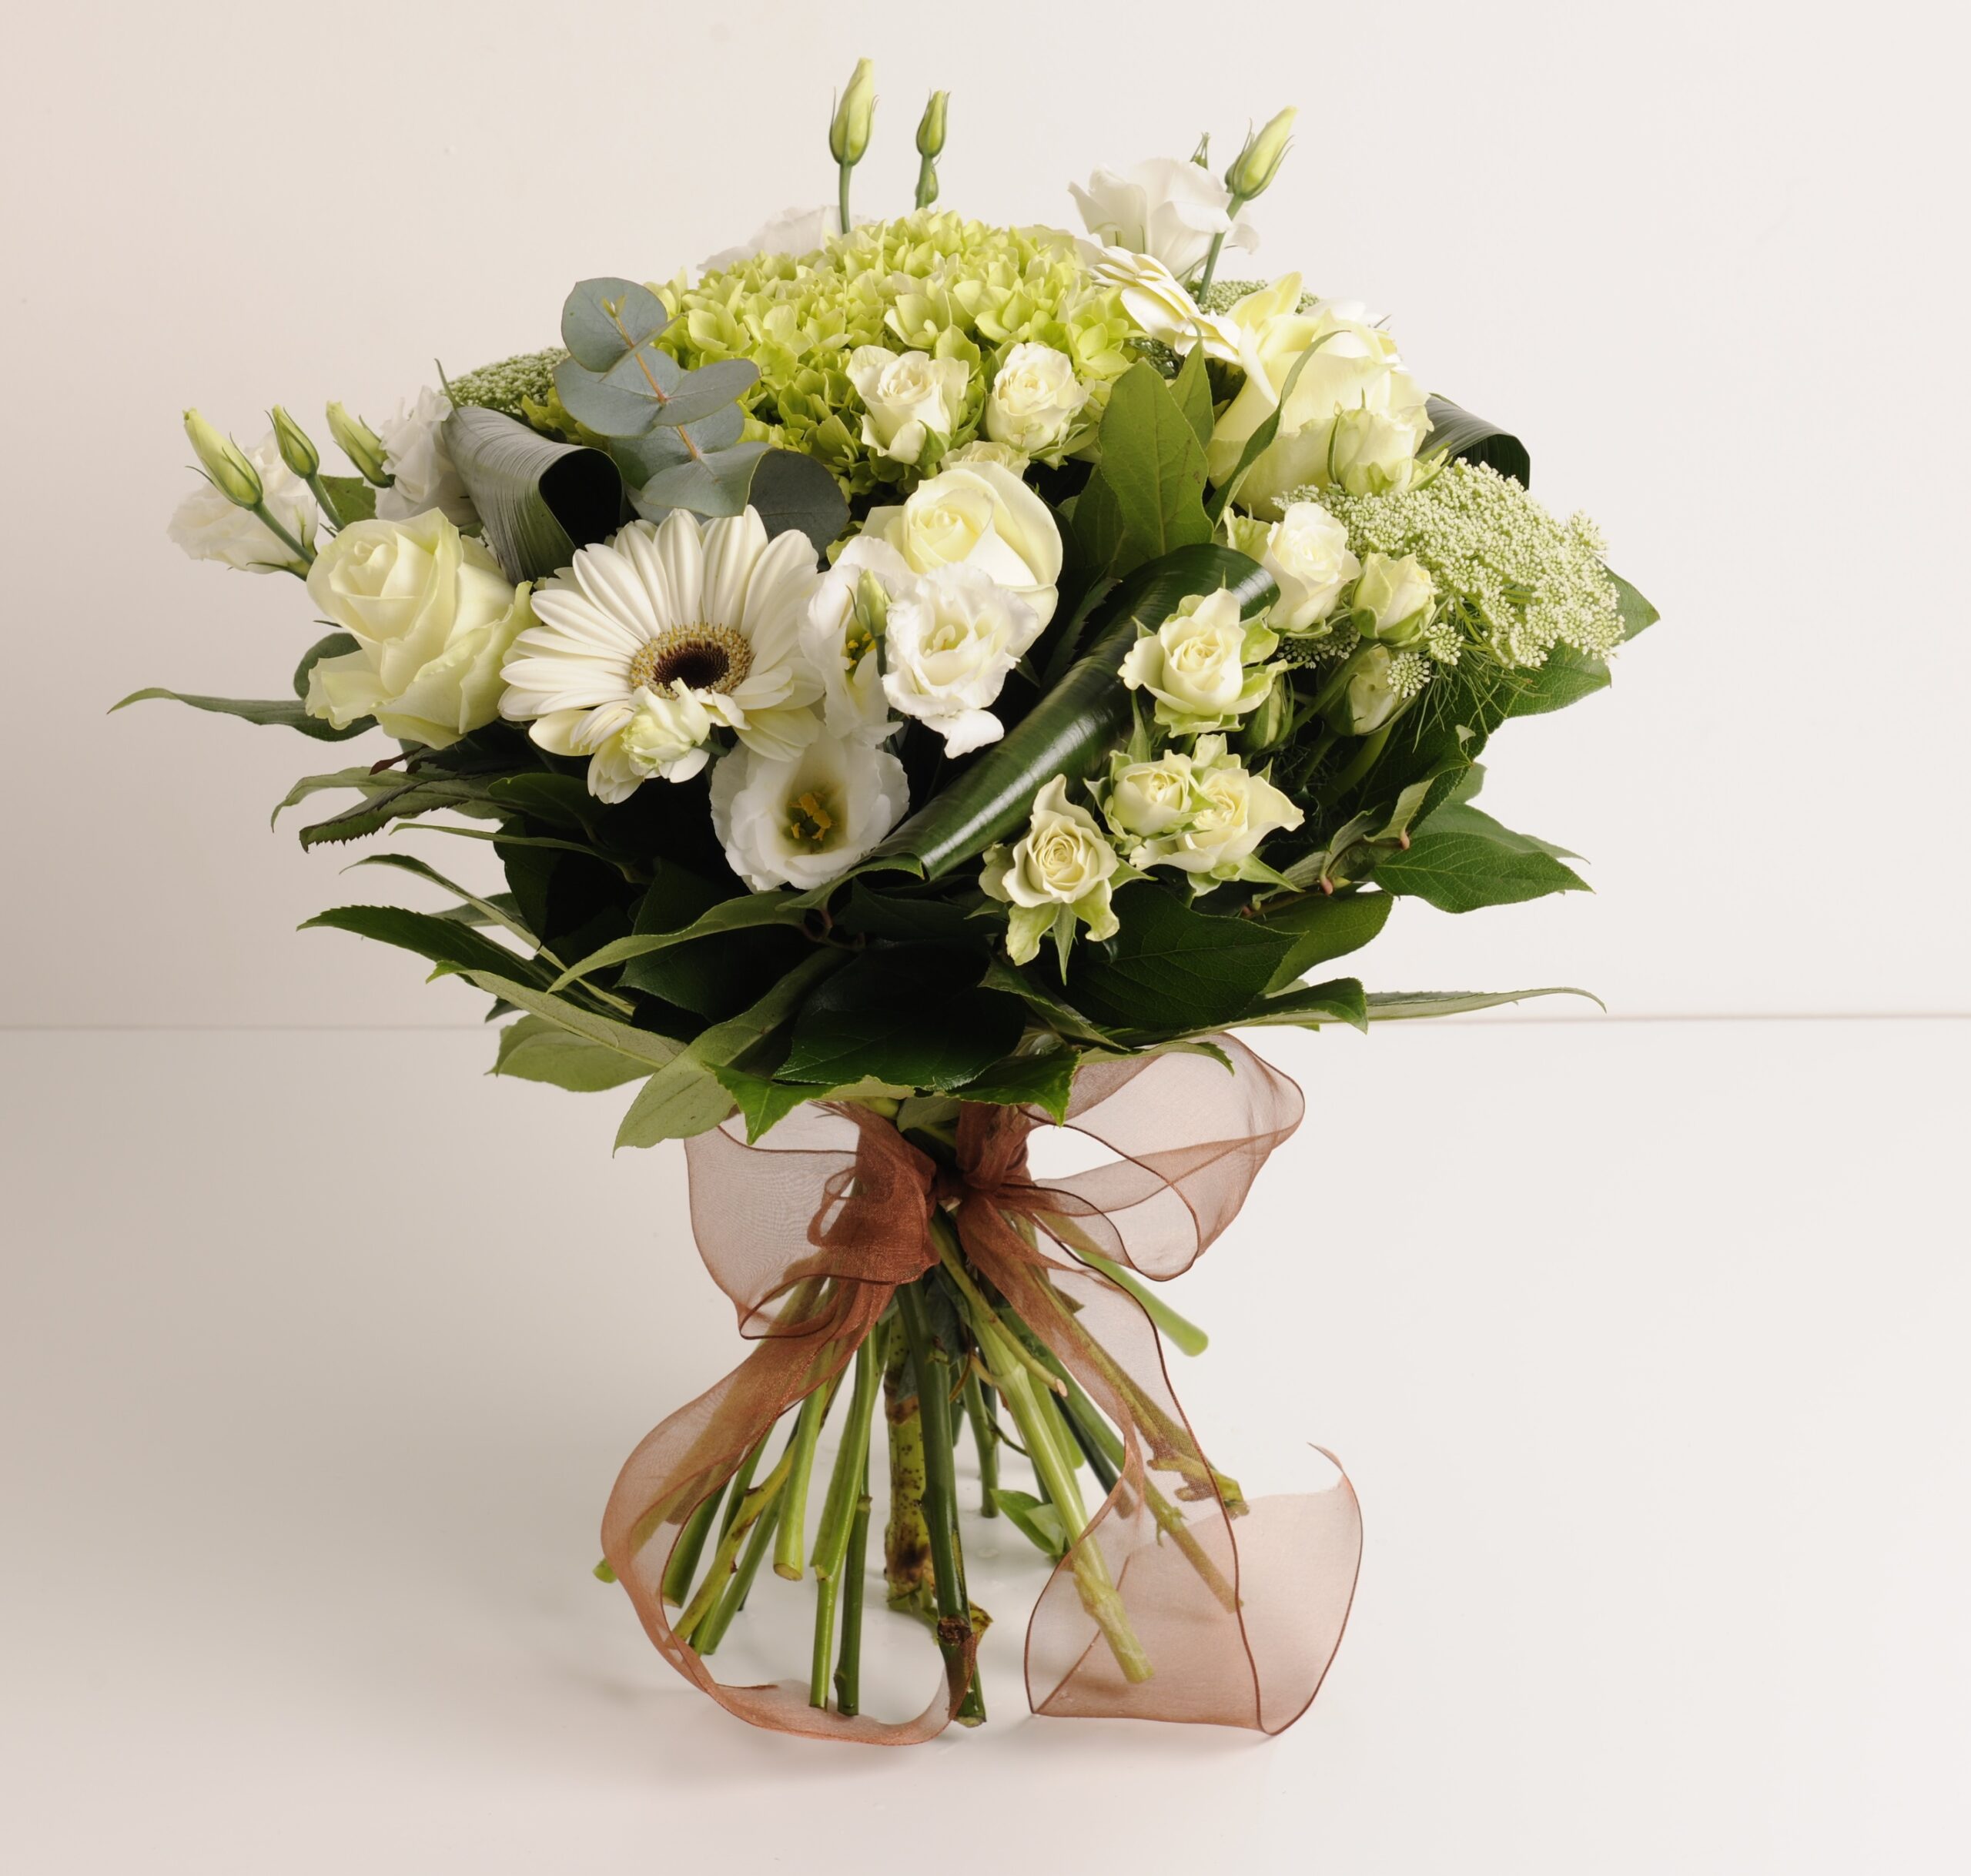 English country hand-tied bouquet fresh flowers white green foliage